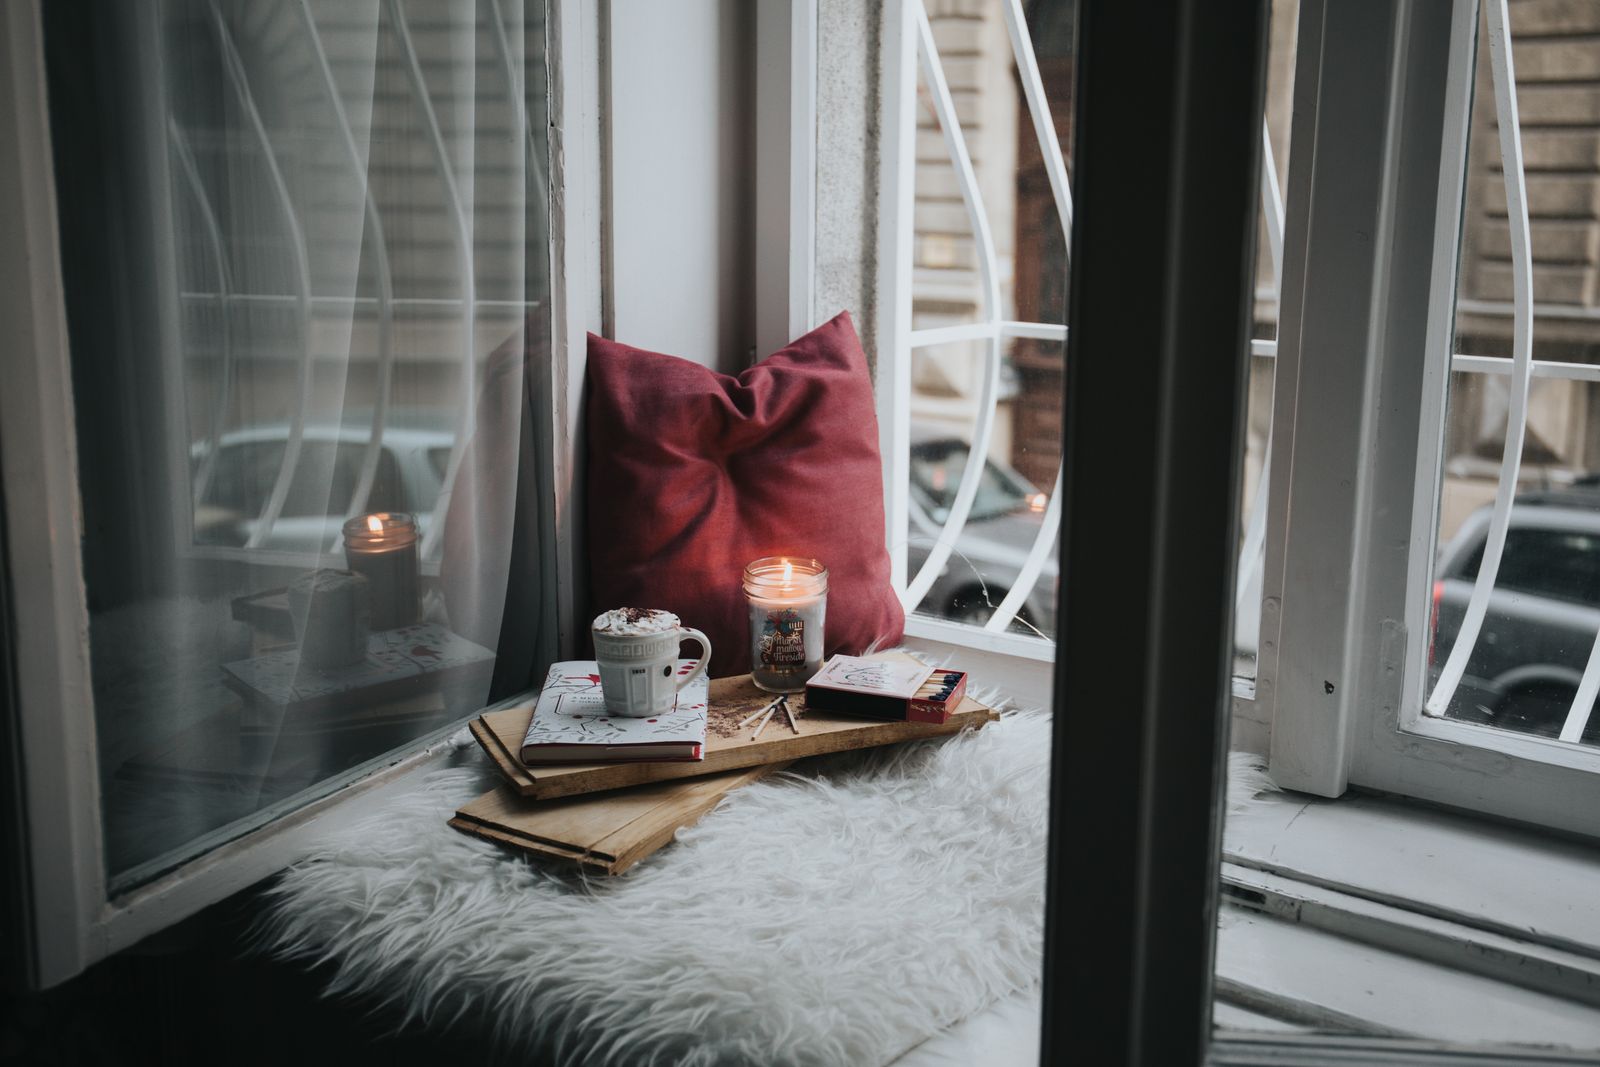 Window sill with a red pillow, a candle, and a mug on top of a book